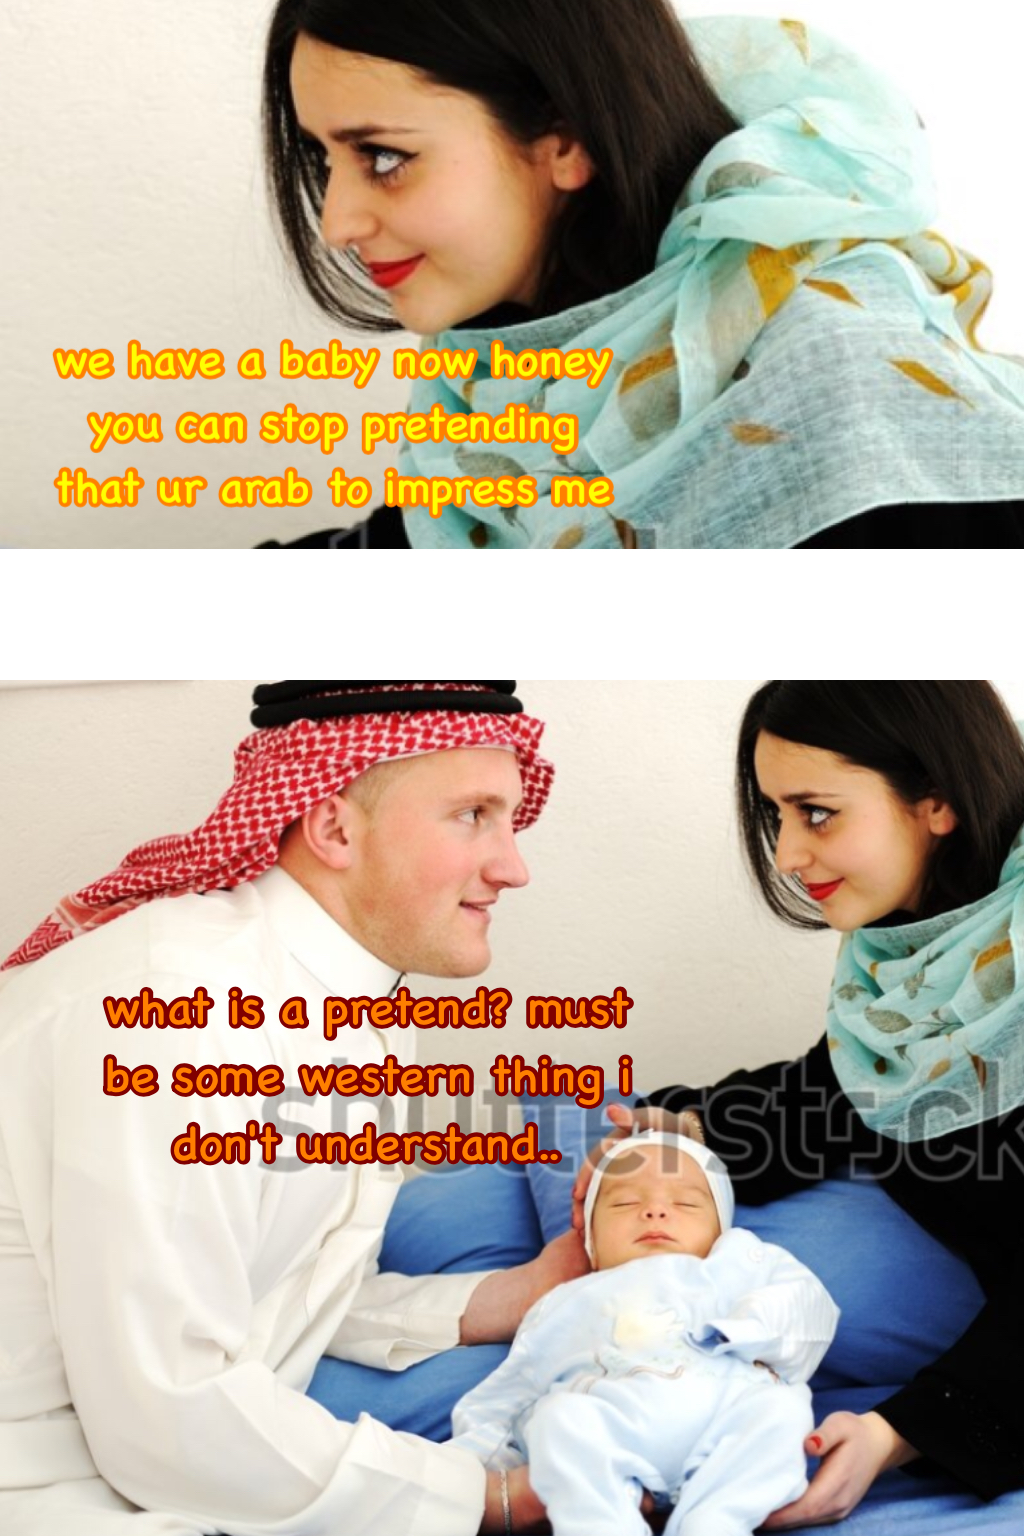 dank meme dank arab memes - we have a baby now honey you can stop pretending that ur arab to impress me what is a pretend must be some western thing i don't understand.